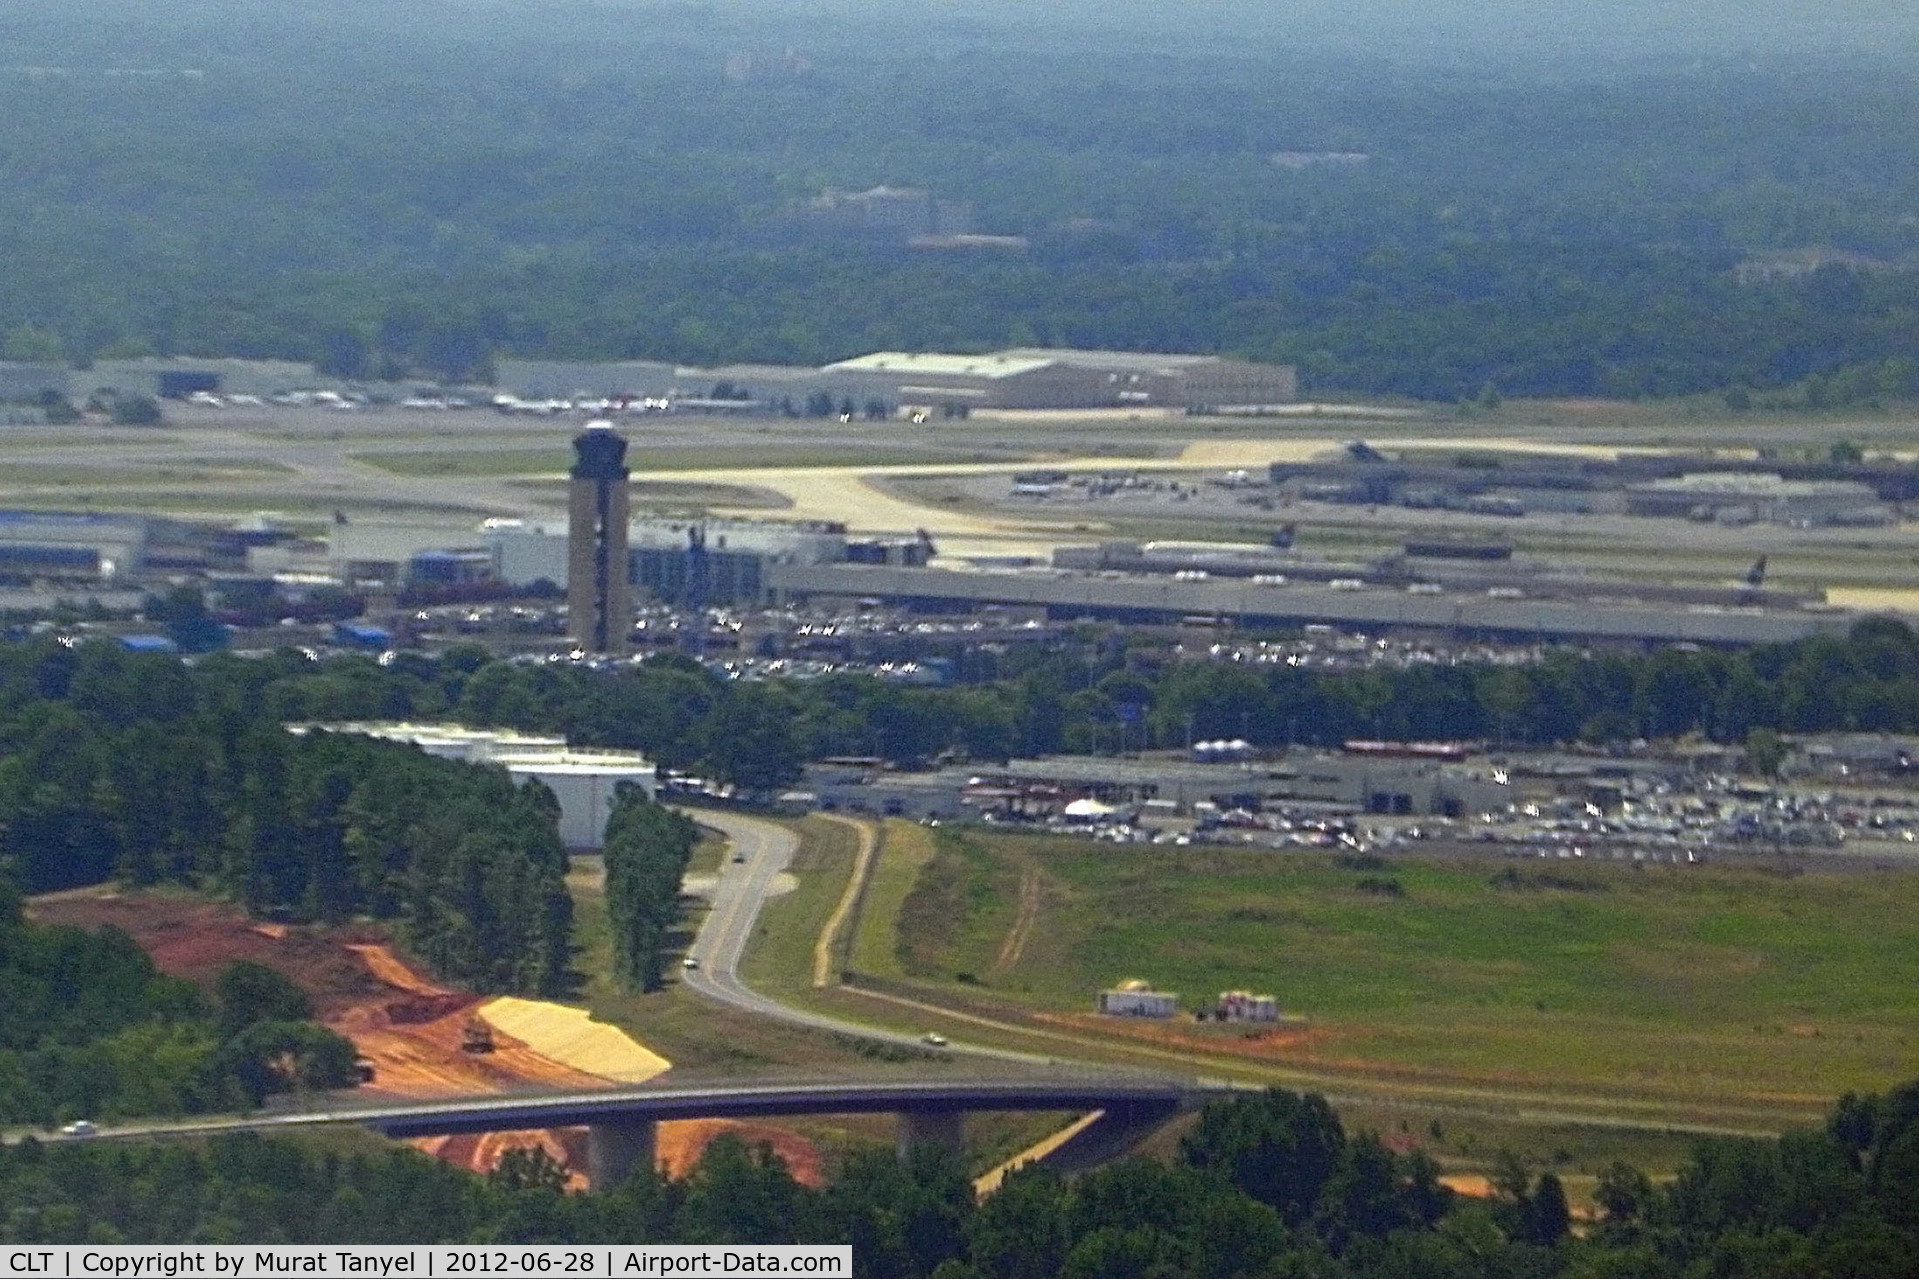 Charlotte/douglas International Airport (CLT) - The control tower as we approach CLT